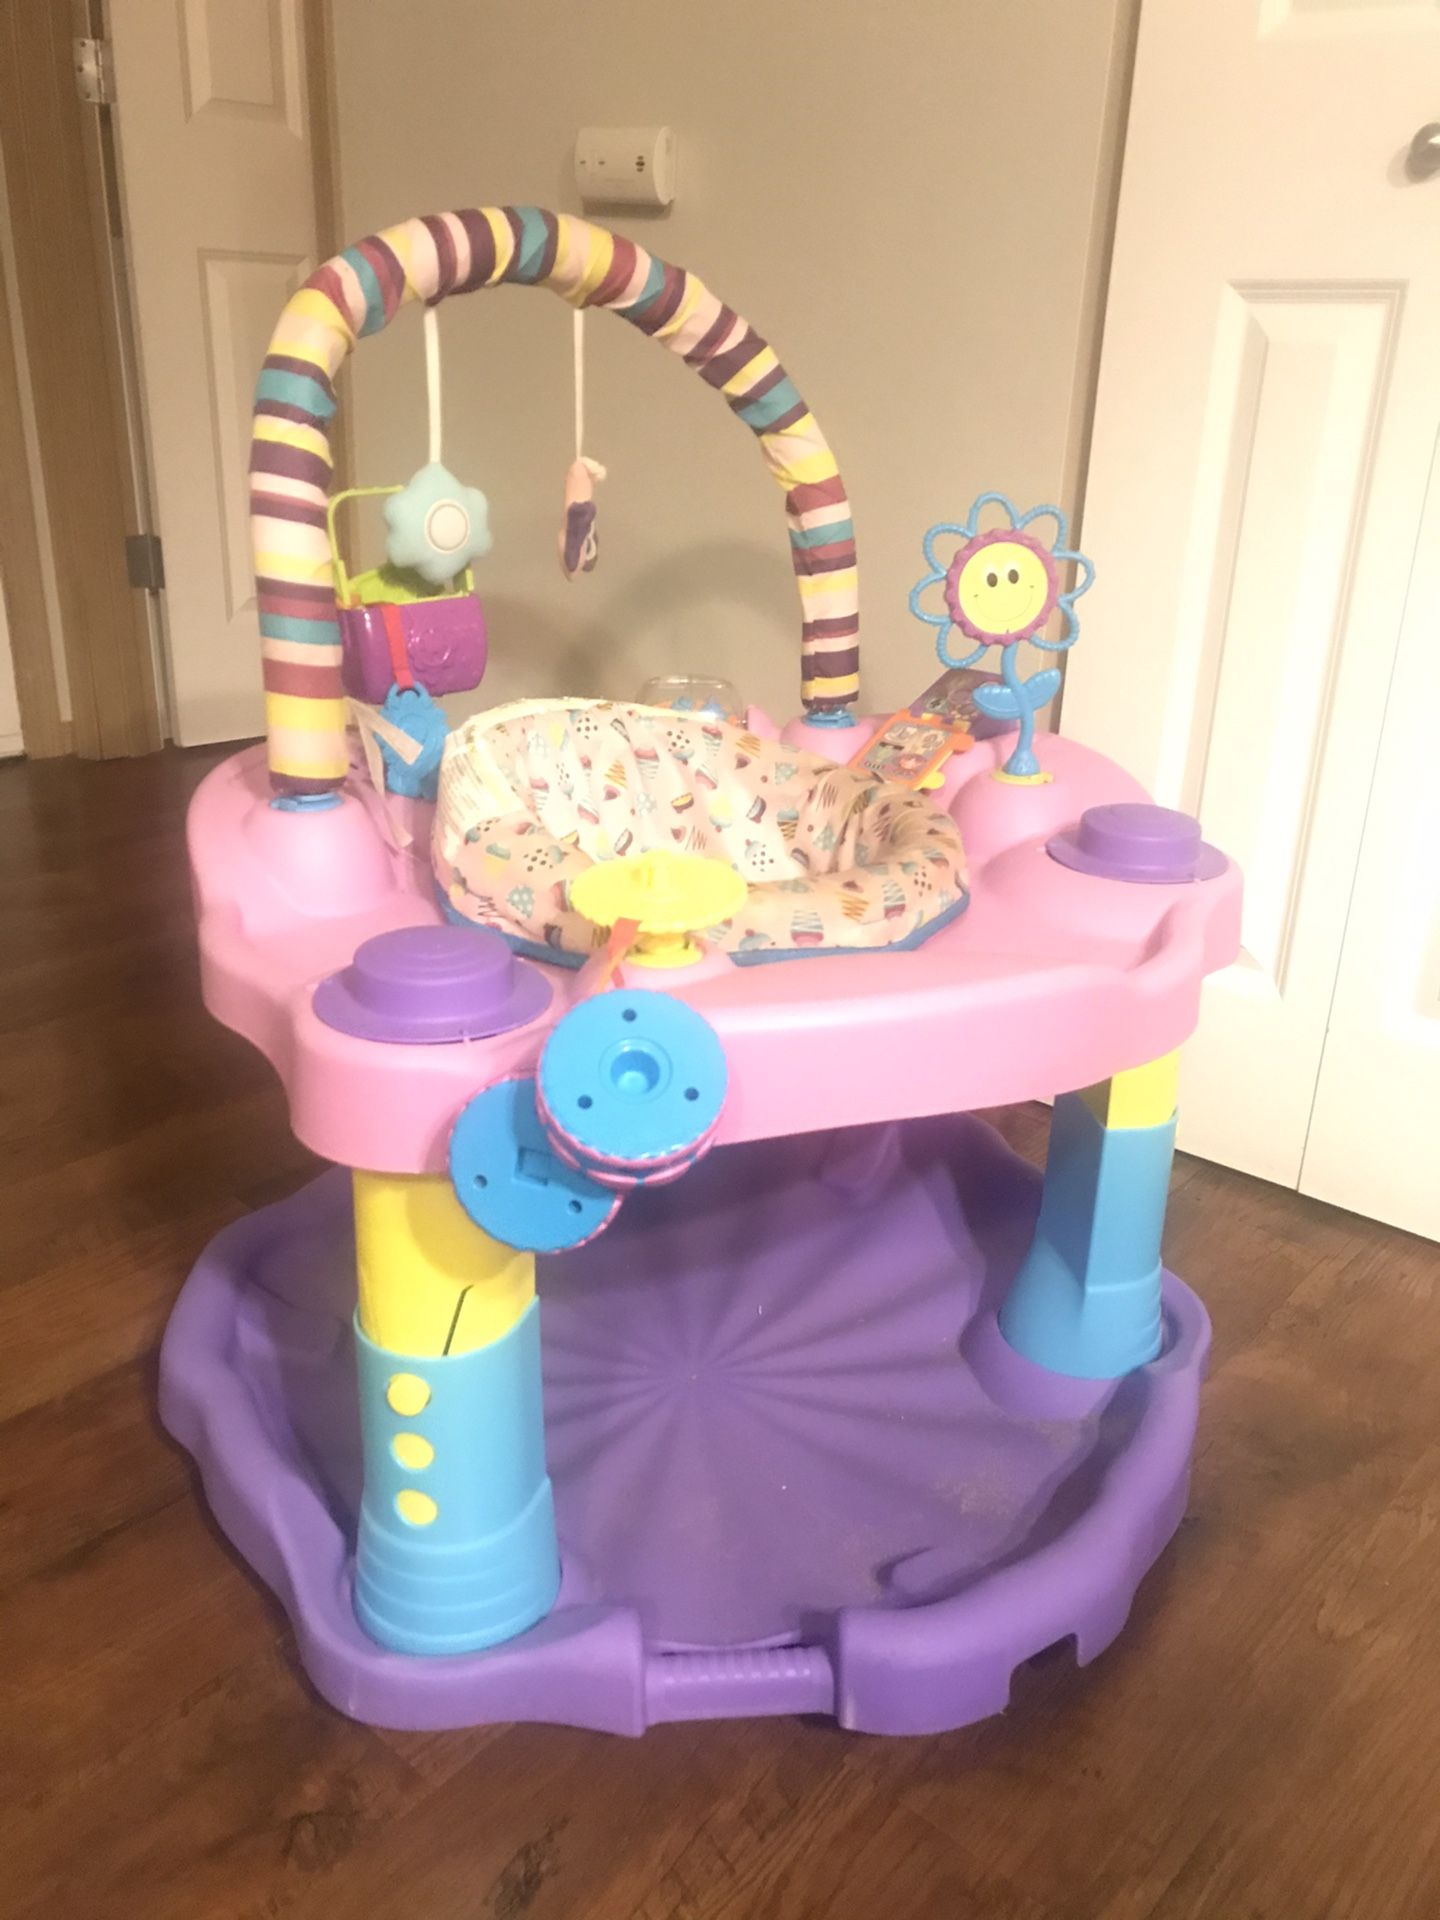 Evenflo Exersaucer Bounce and Learn Sweet Tea, Party